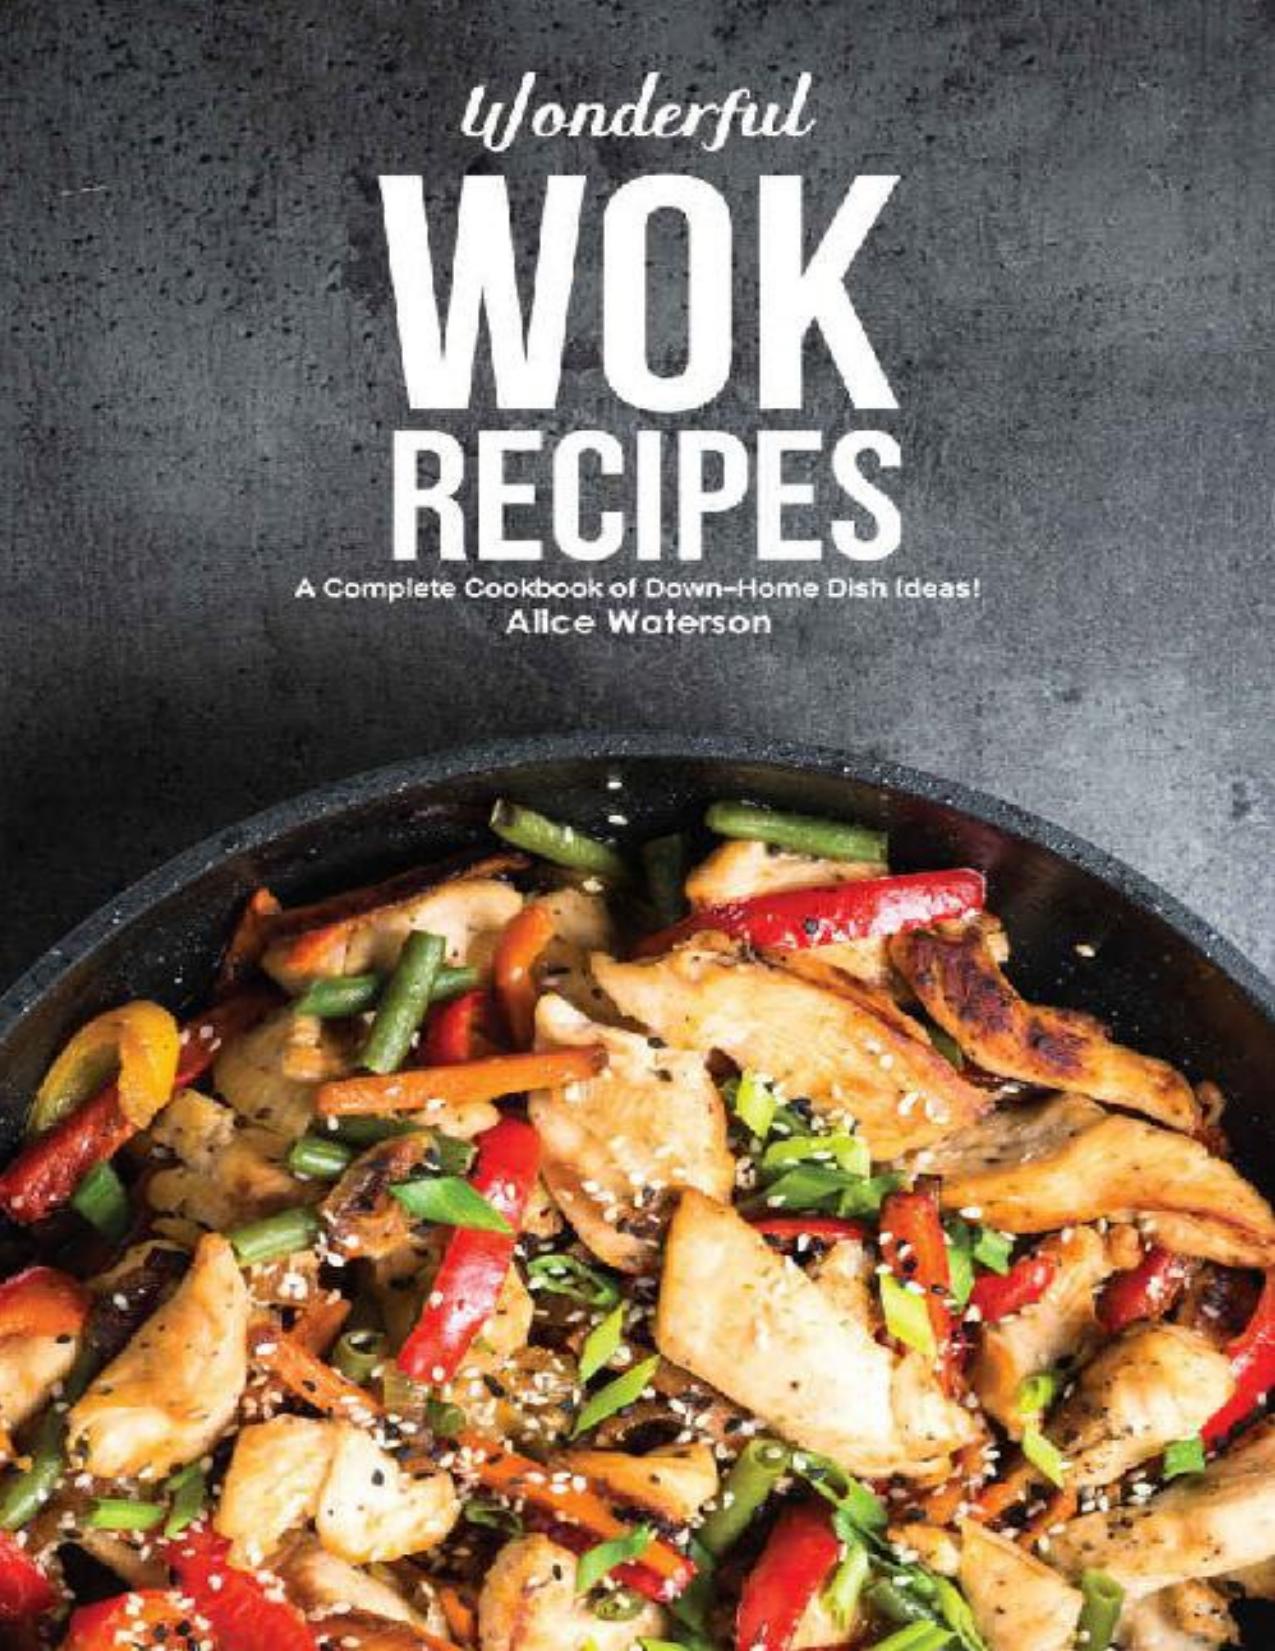 Wonderful Wok Recipes: A Complete Cookbook of Down-Home Dish Ideas! by Alice Waterson